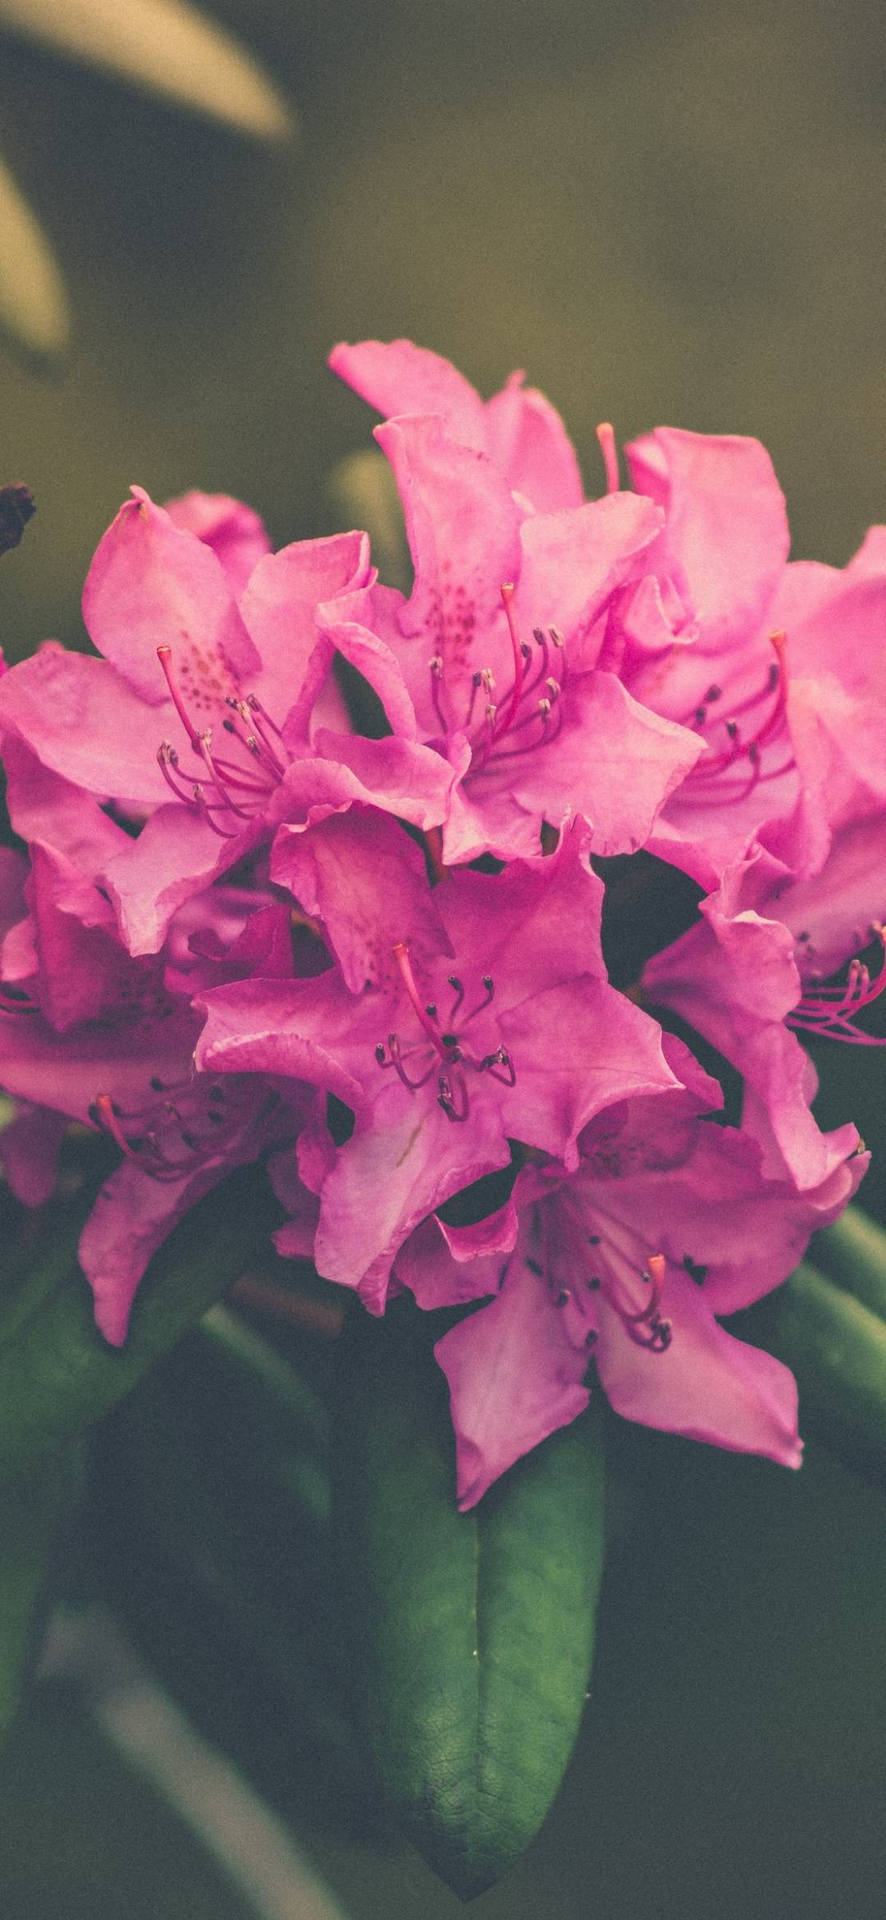 Elegant Pink Rhododendron Blooming On Phone Wallpaper Background